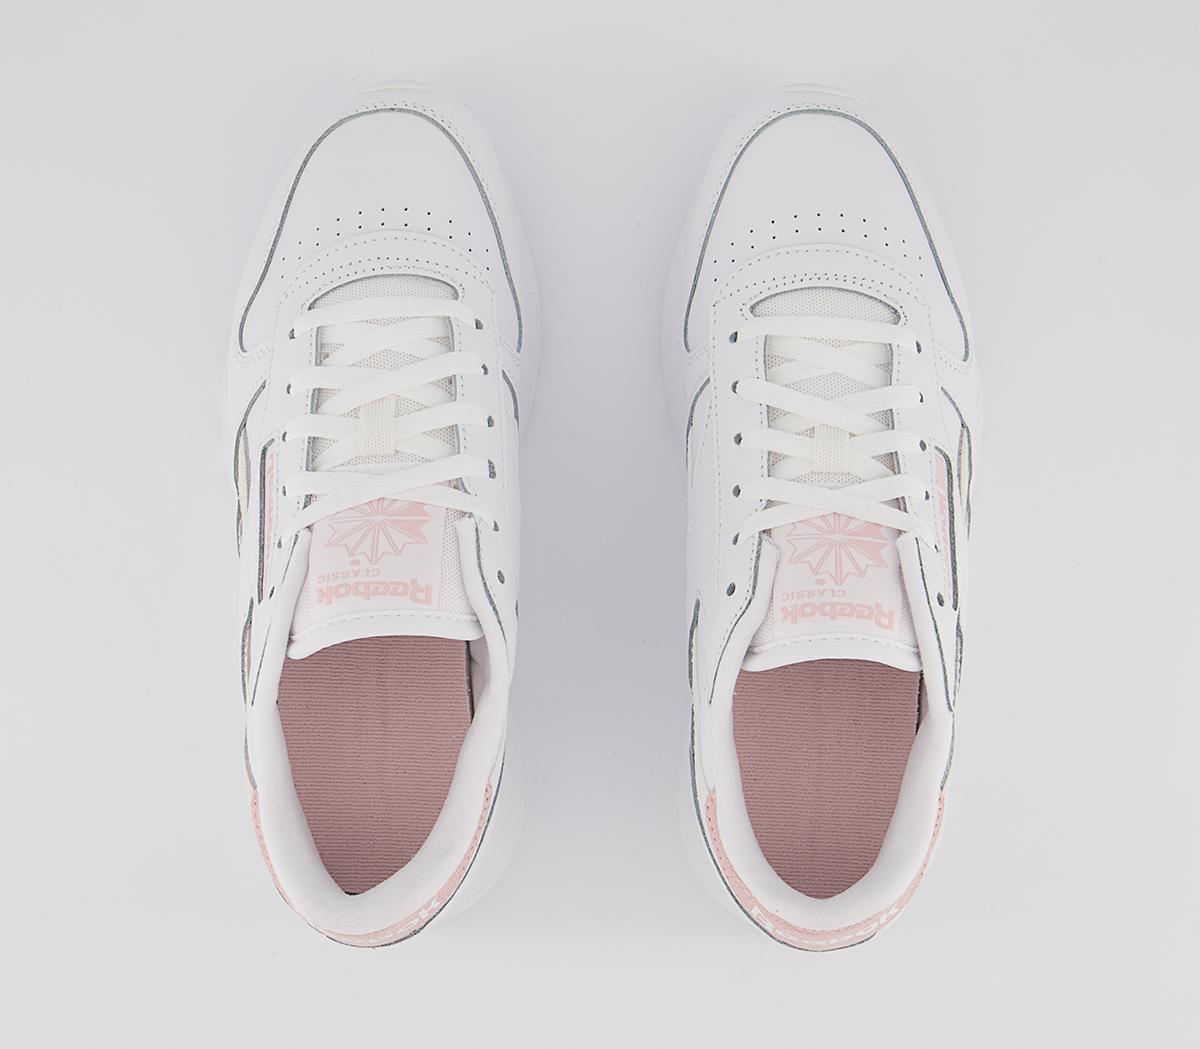 Reebok Classic Leather SP Trainers White Porcelain Pink - Women's Trainers